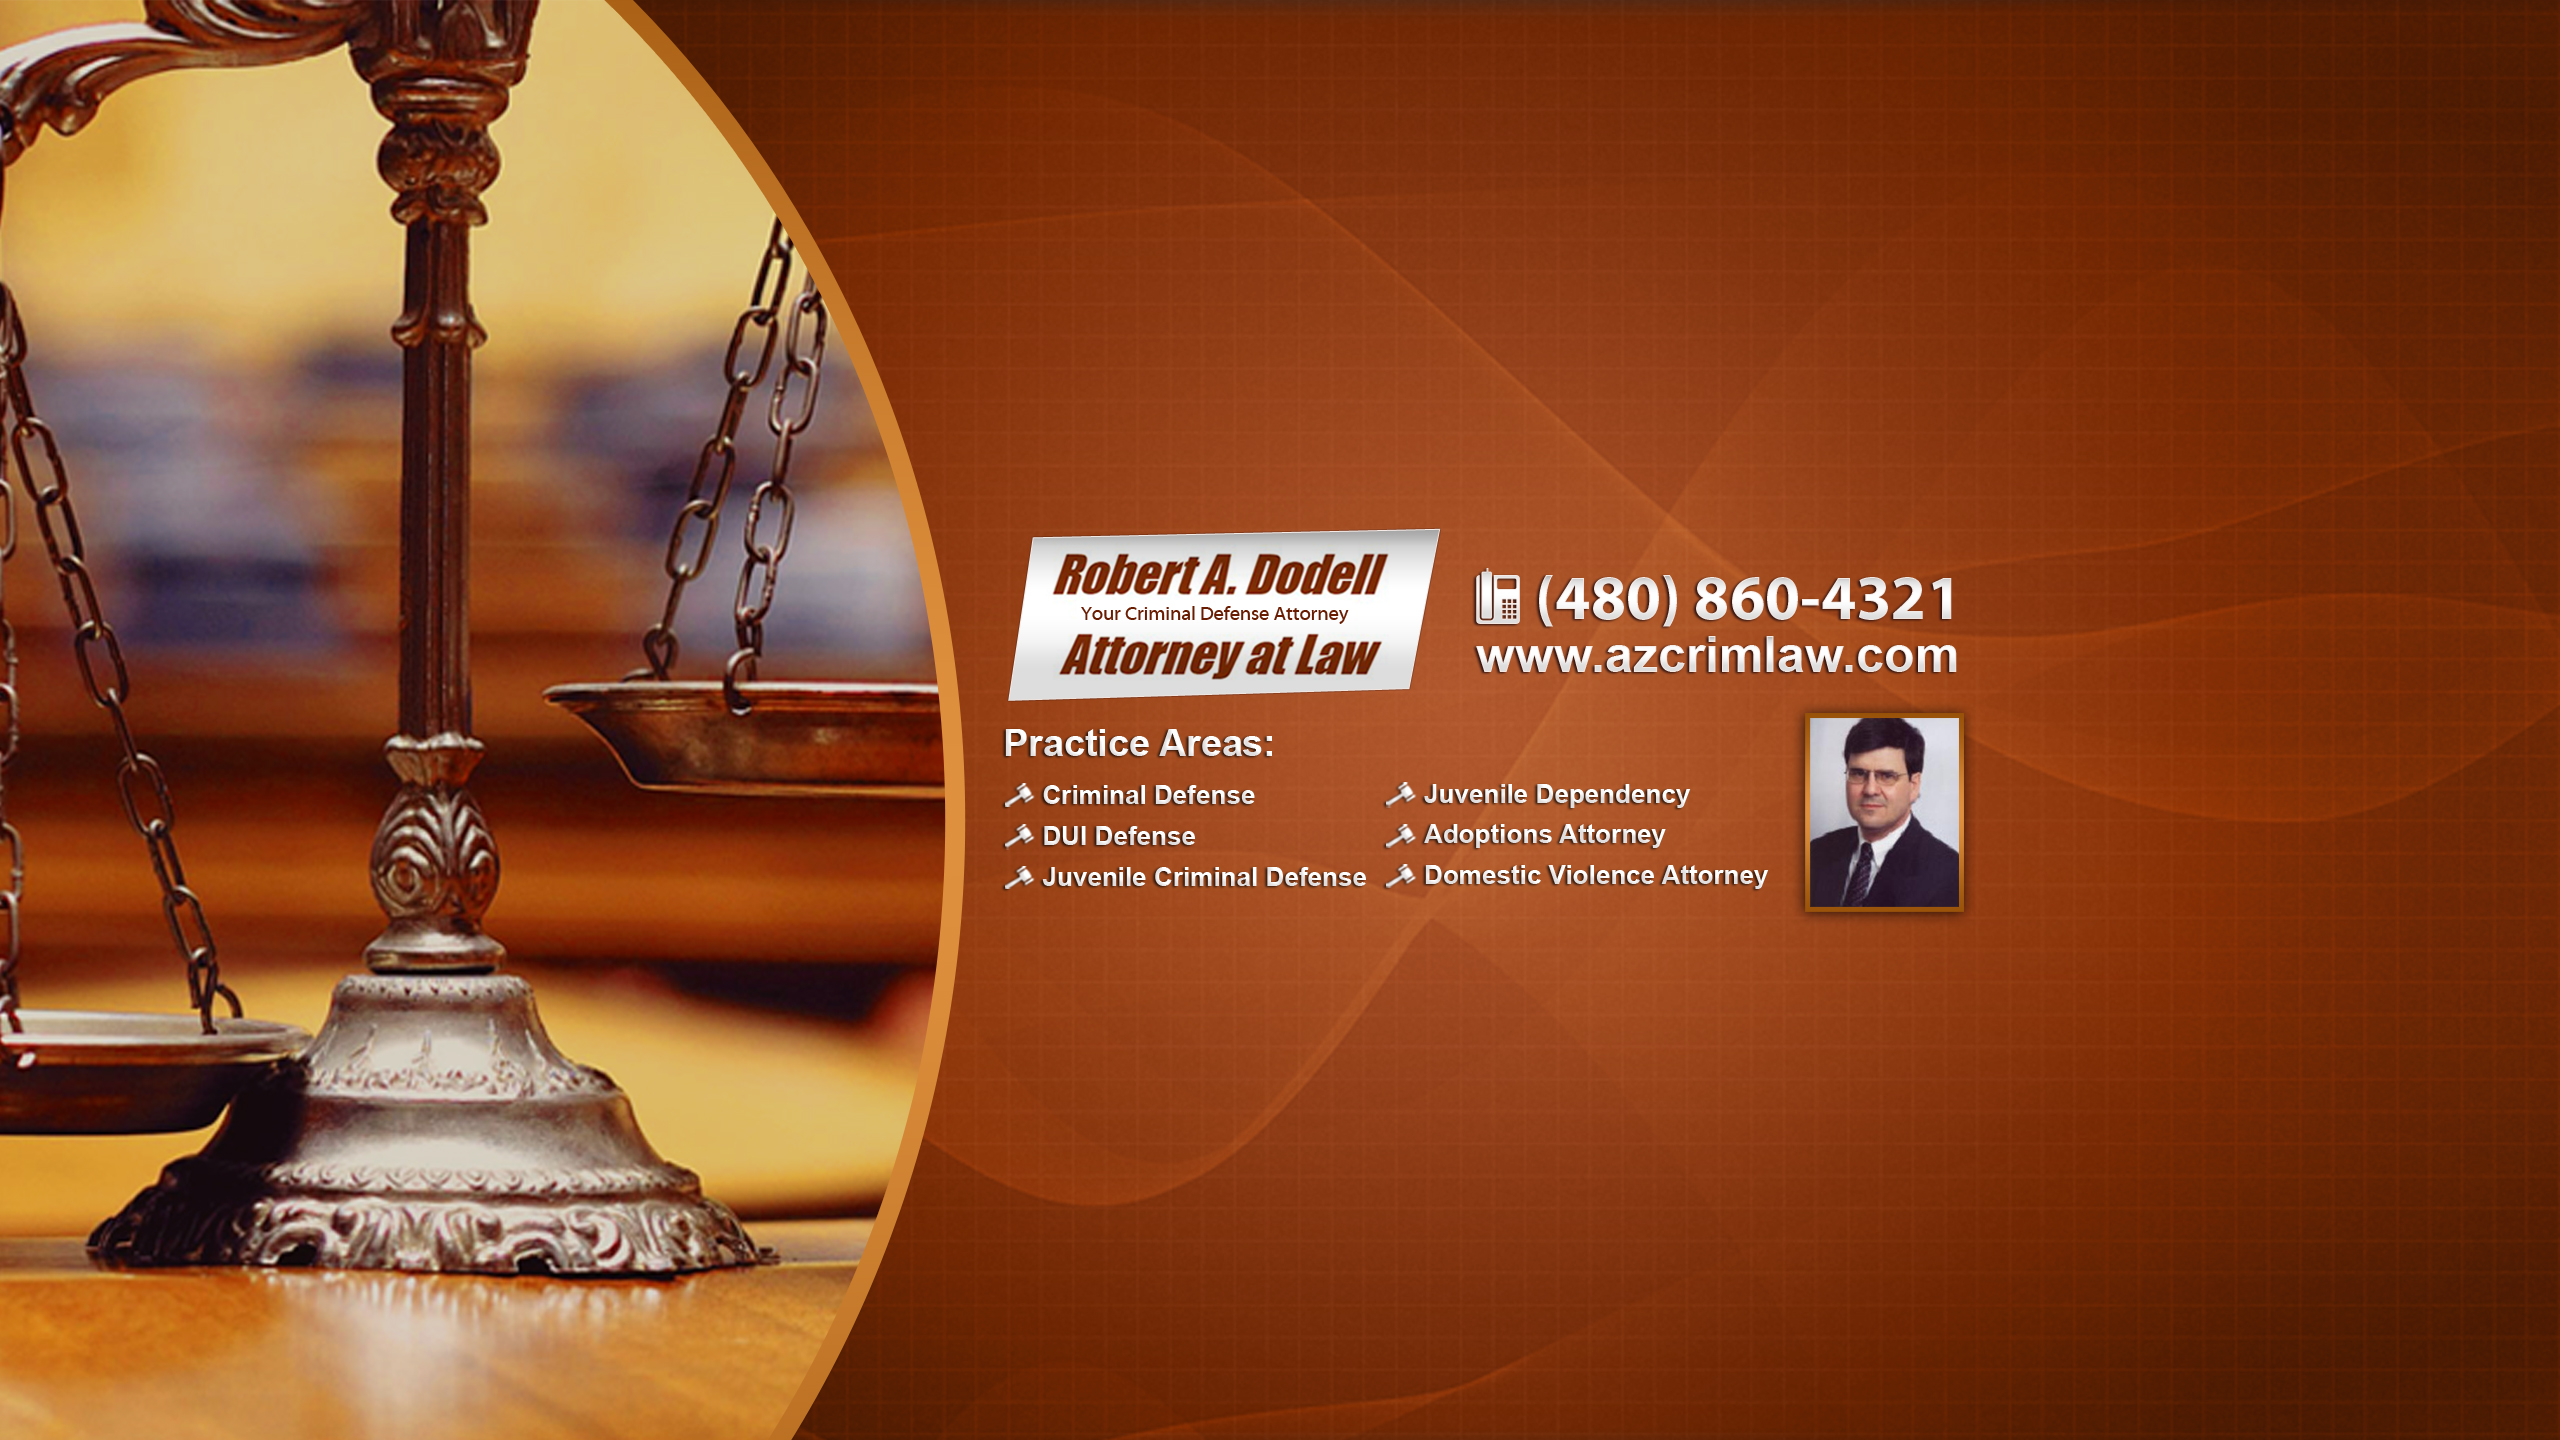 Robert A. Dodell, Attorney at Law